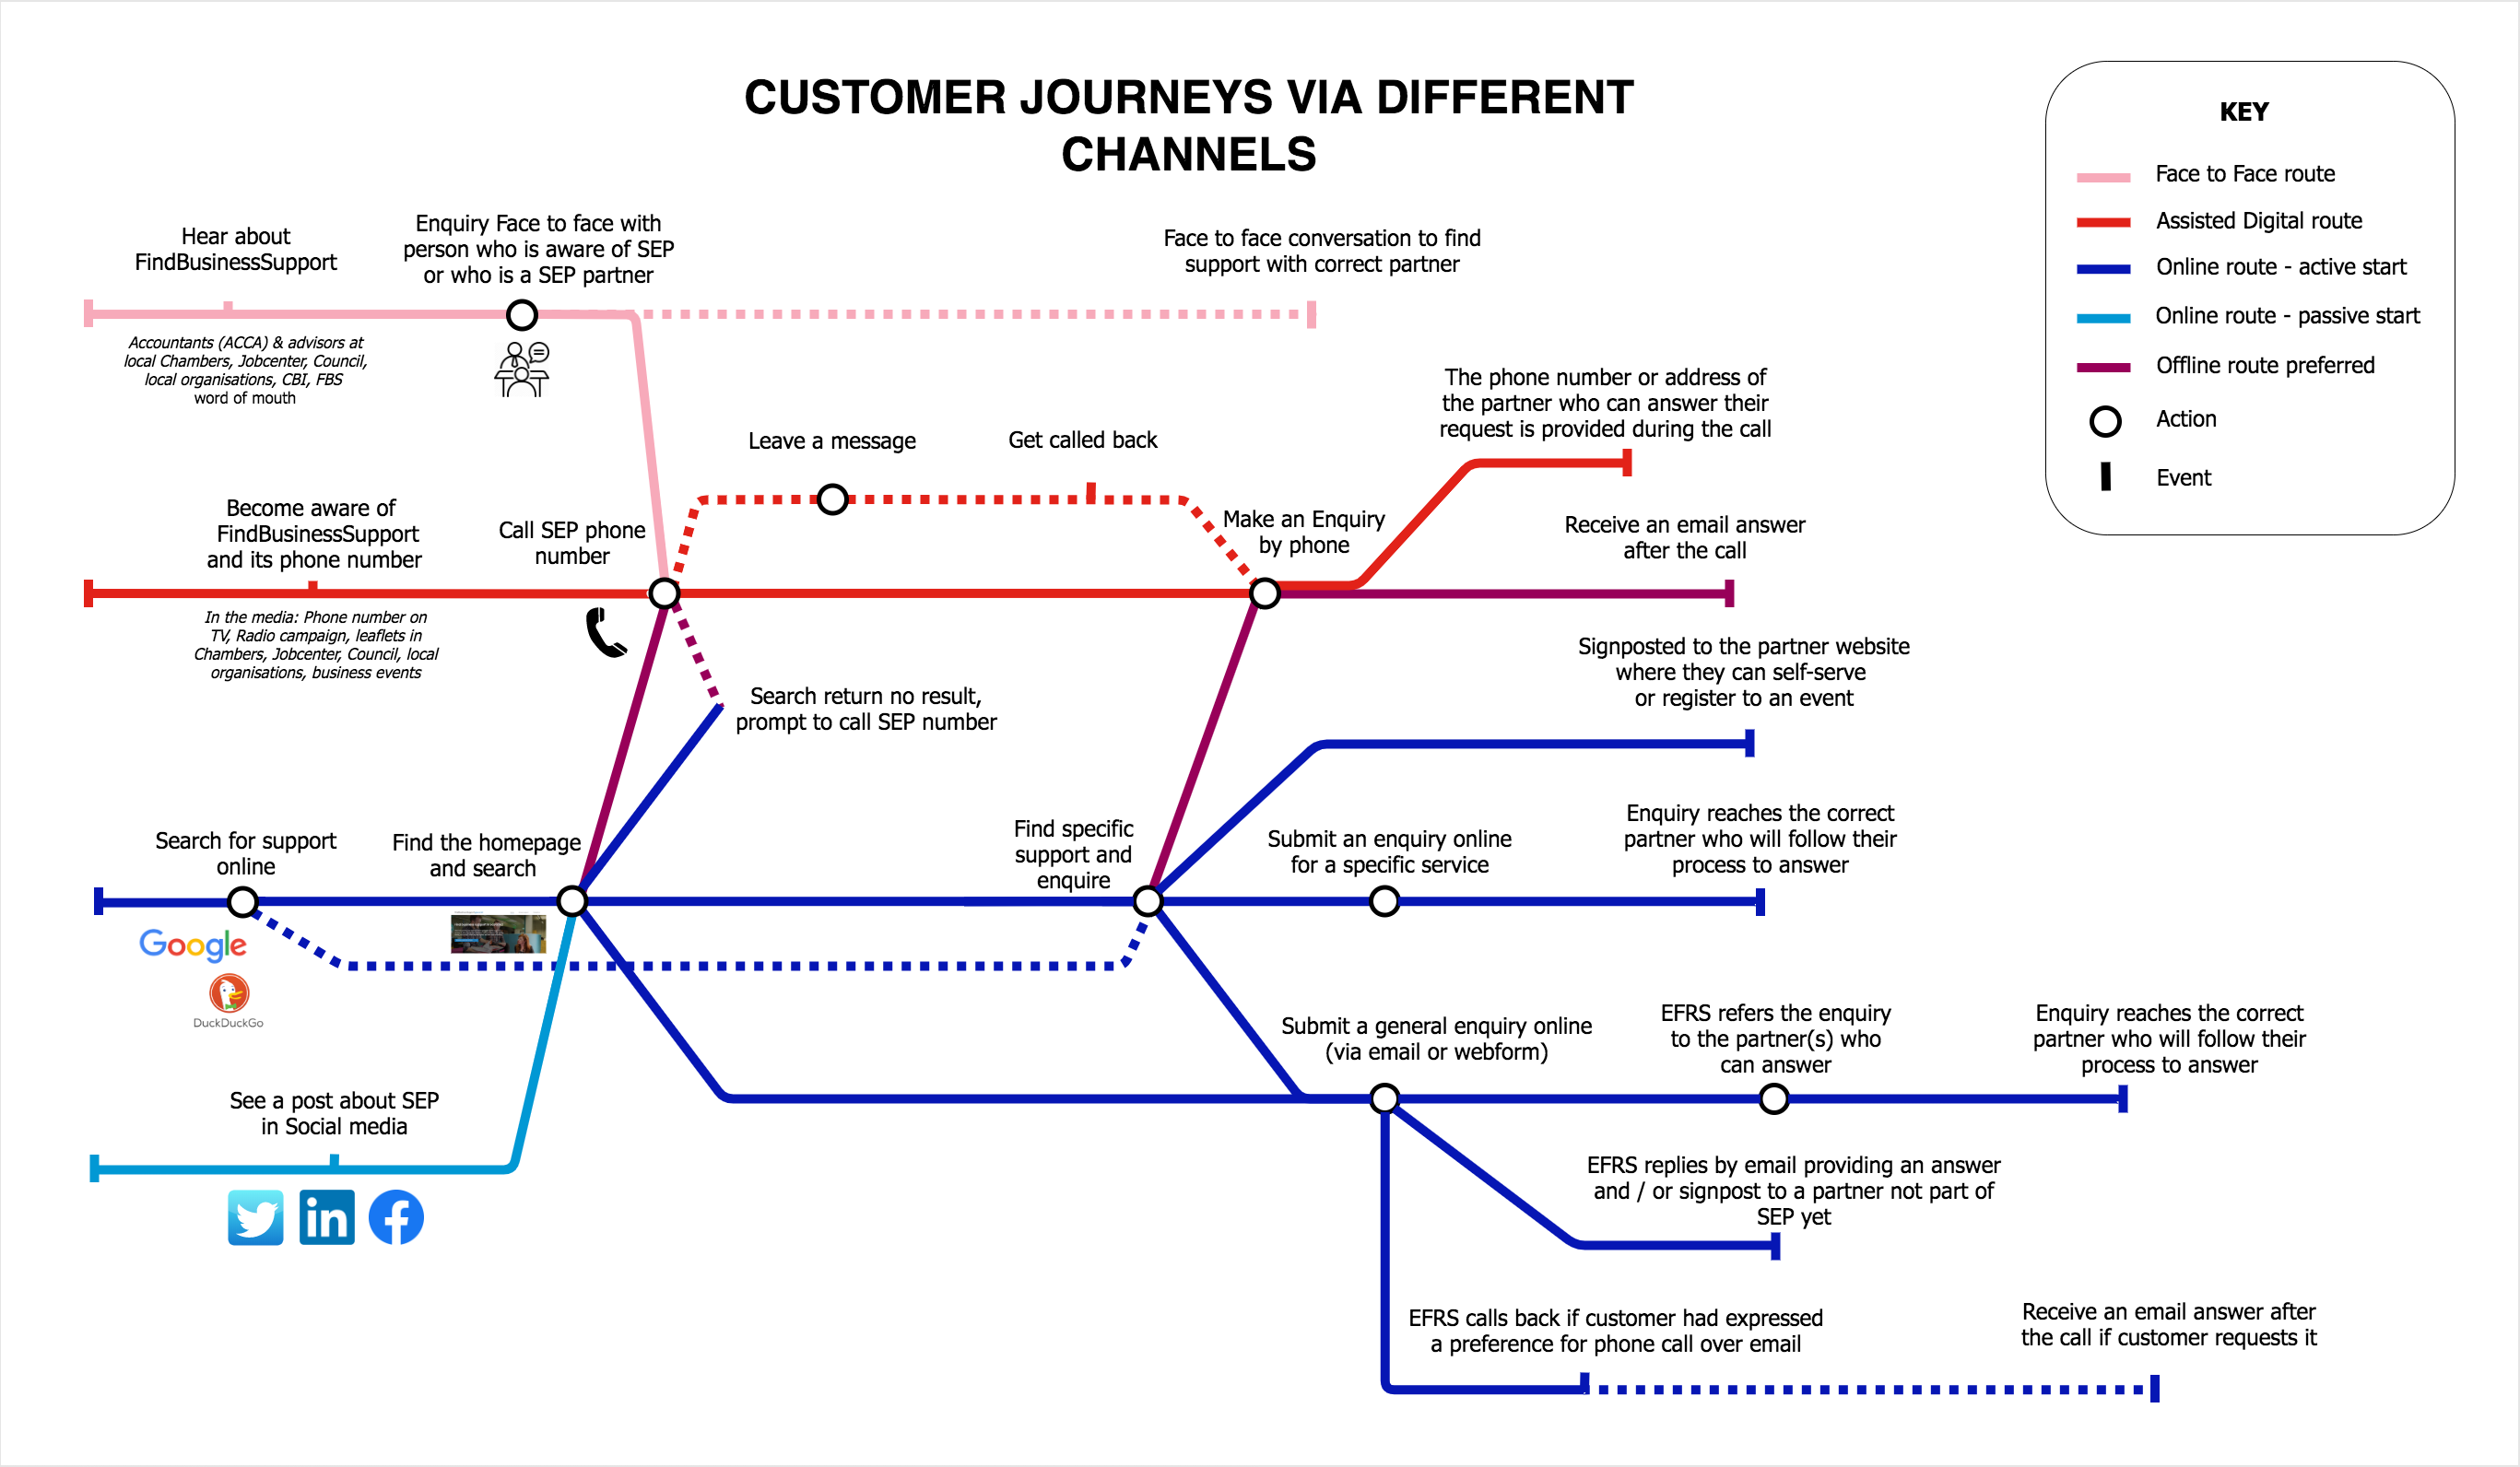 tube map with icons and text explaining the various journey depending of the channel used, some are online, others are face to face or over the phone.